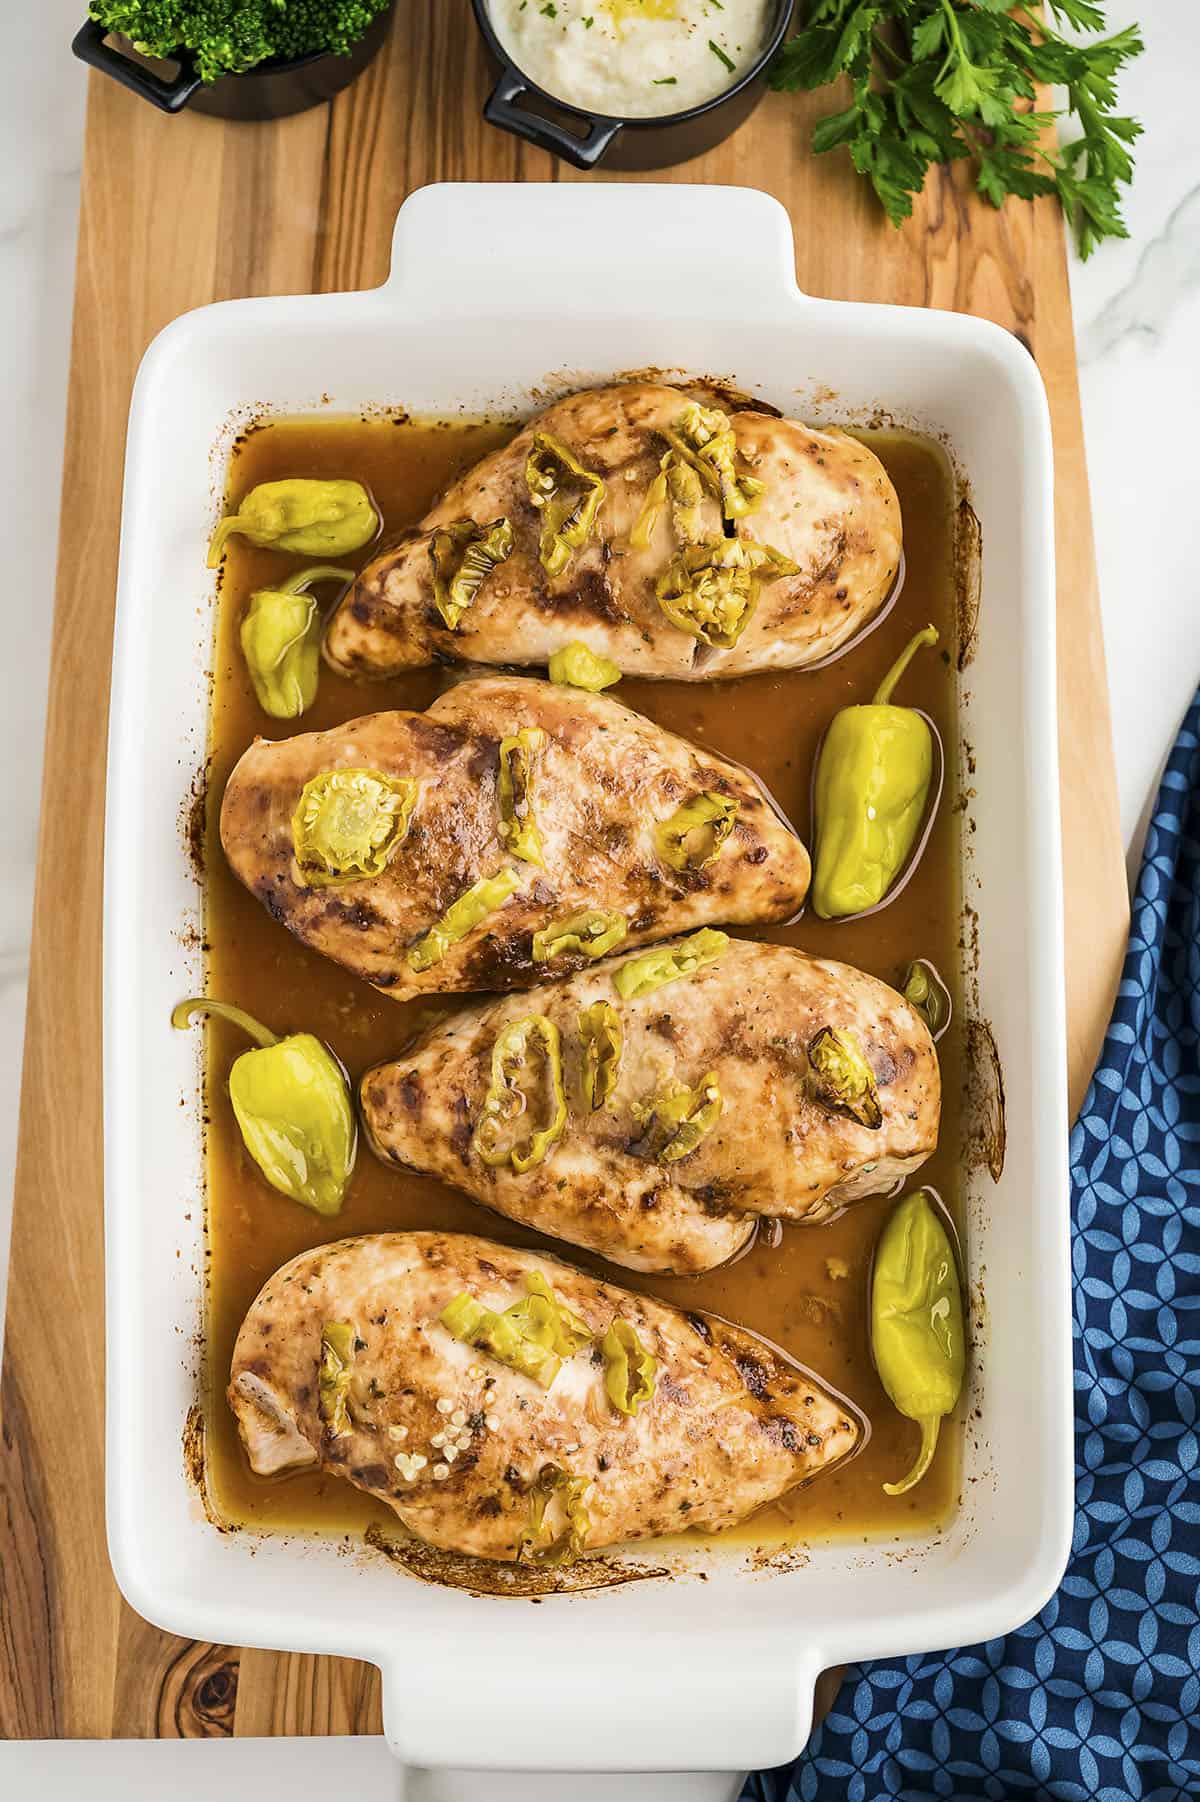 Baked Mississippi chicken in baking dish.